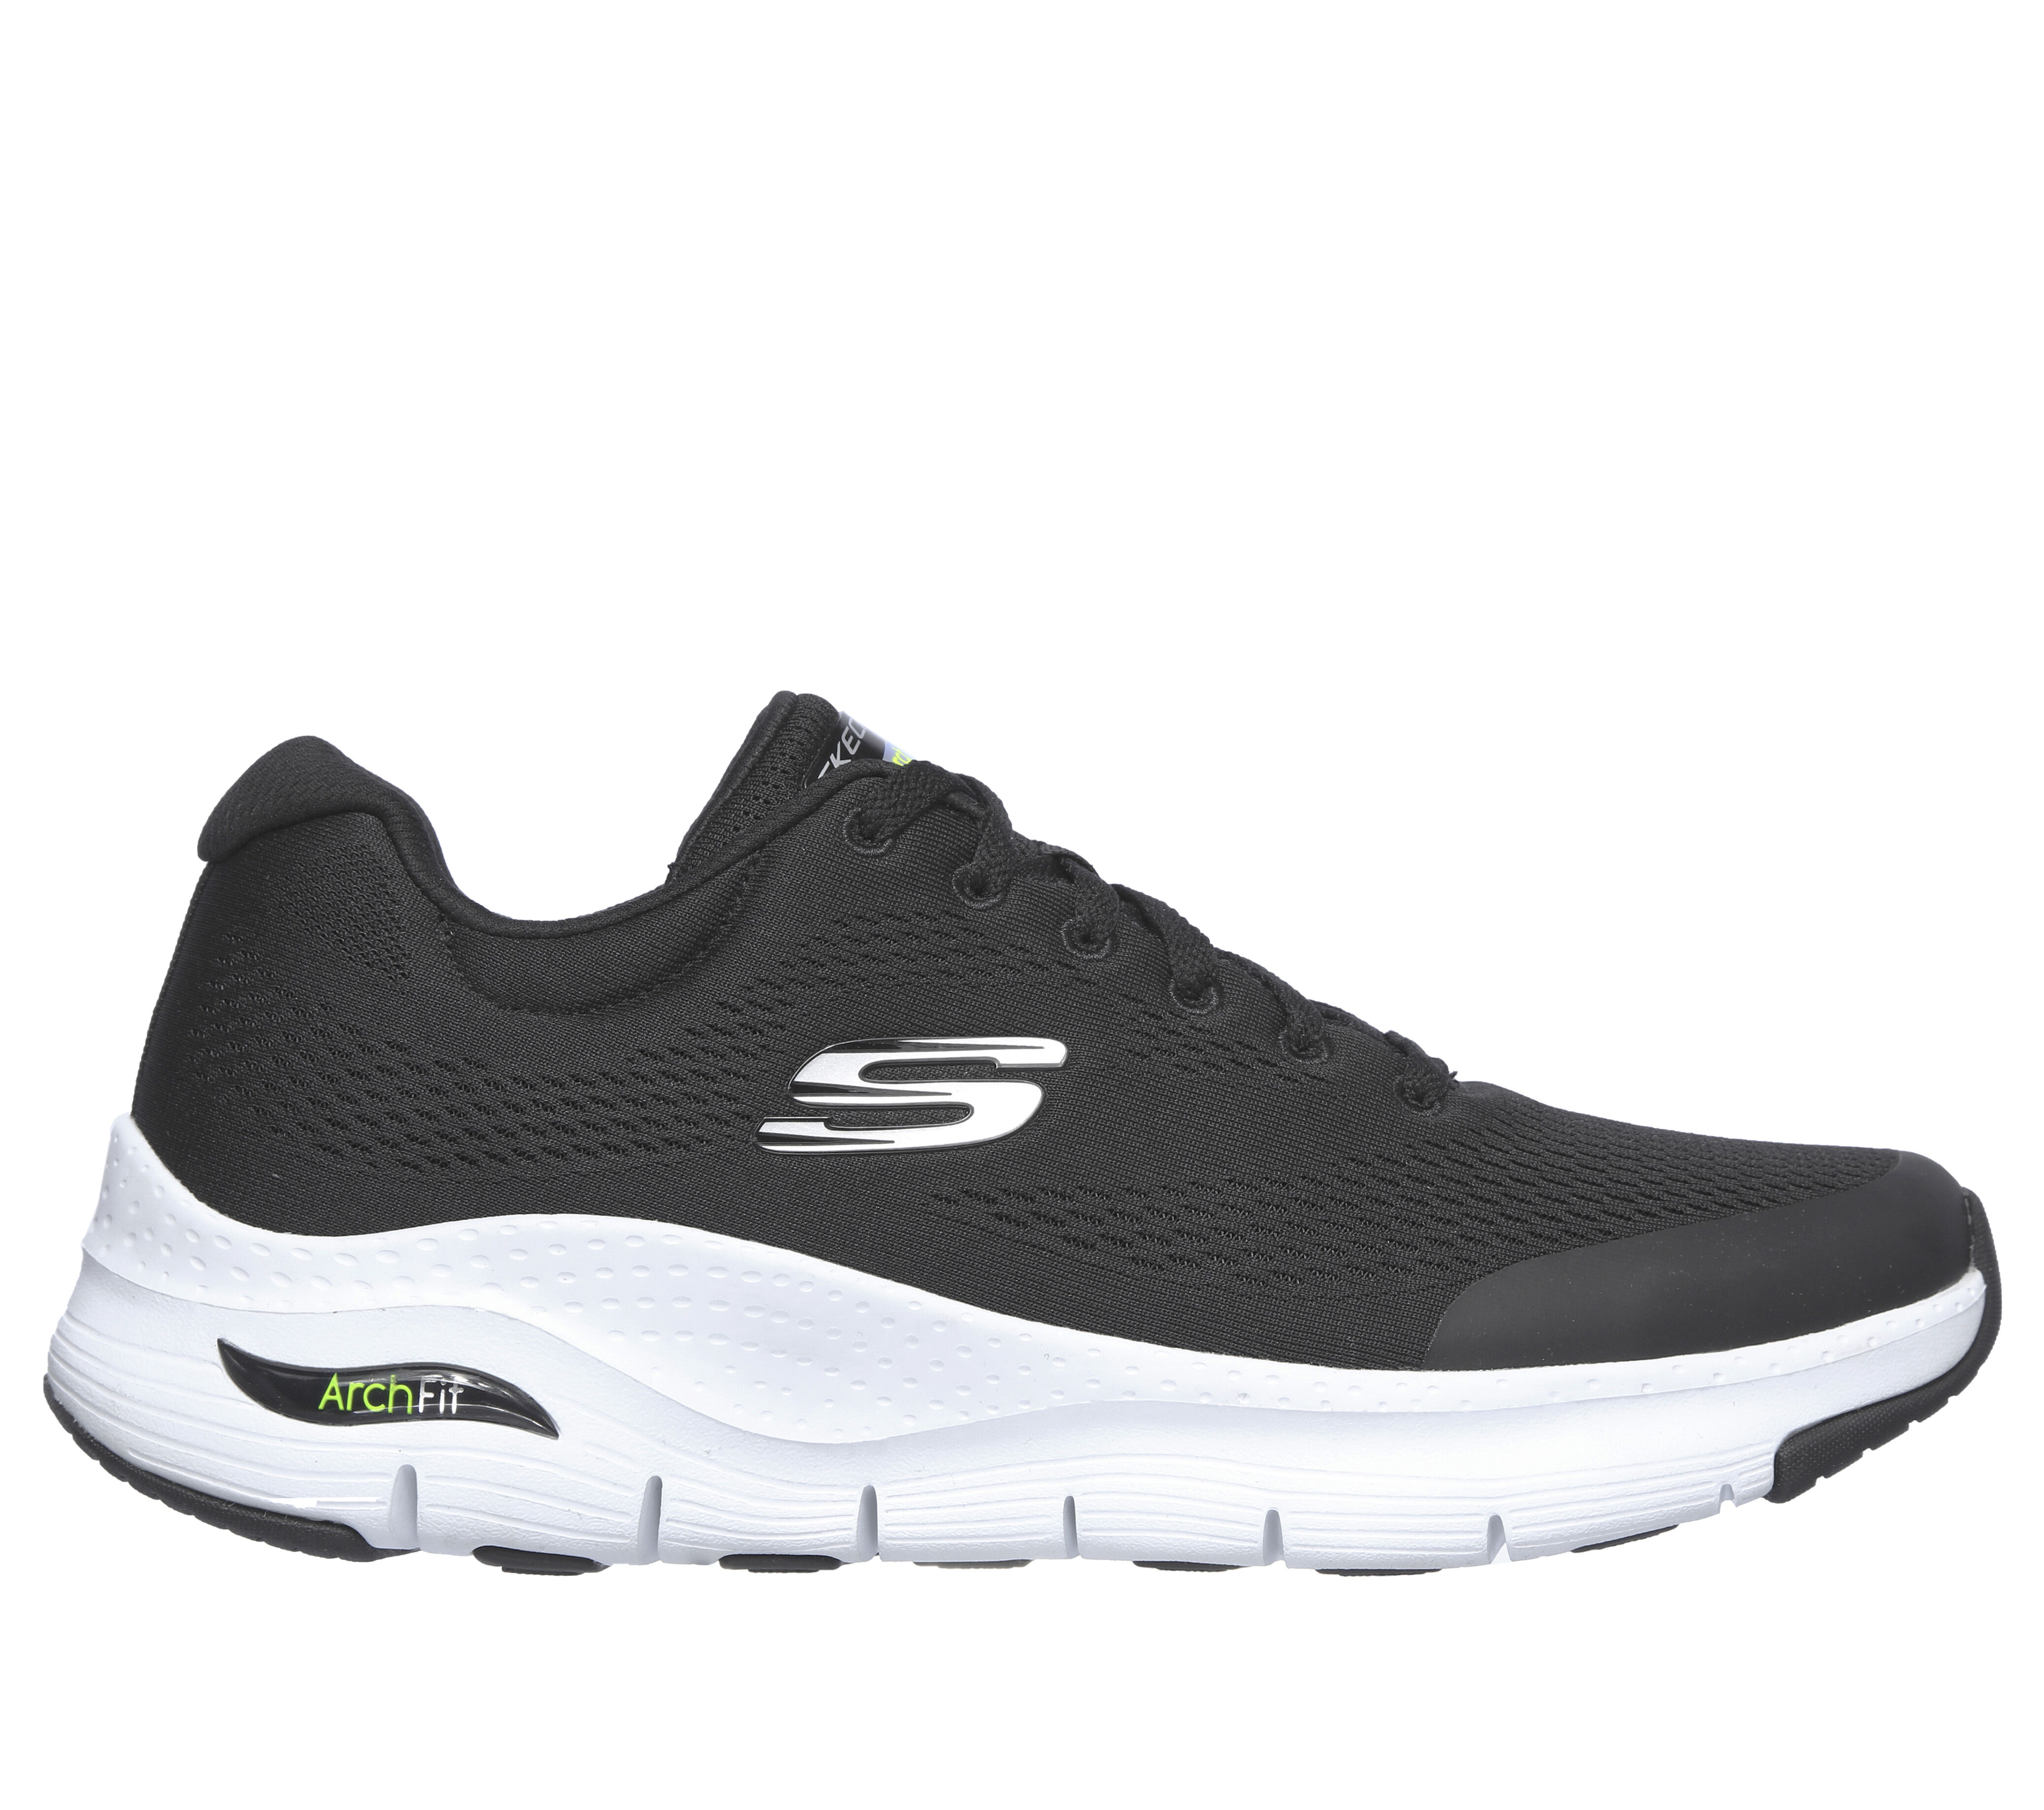 where can i find skechers wide fit shoes